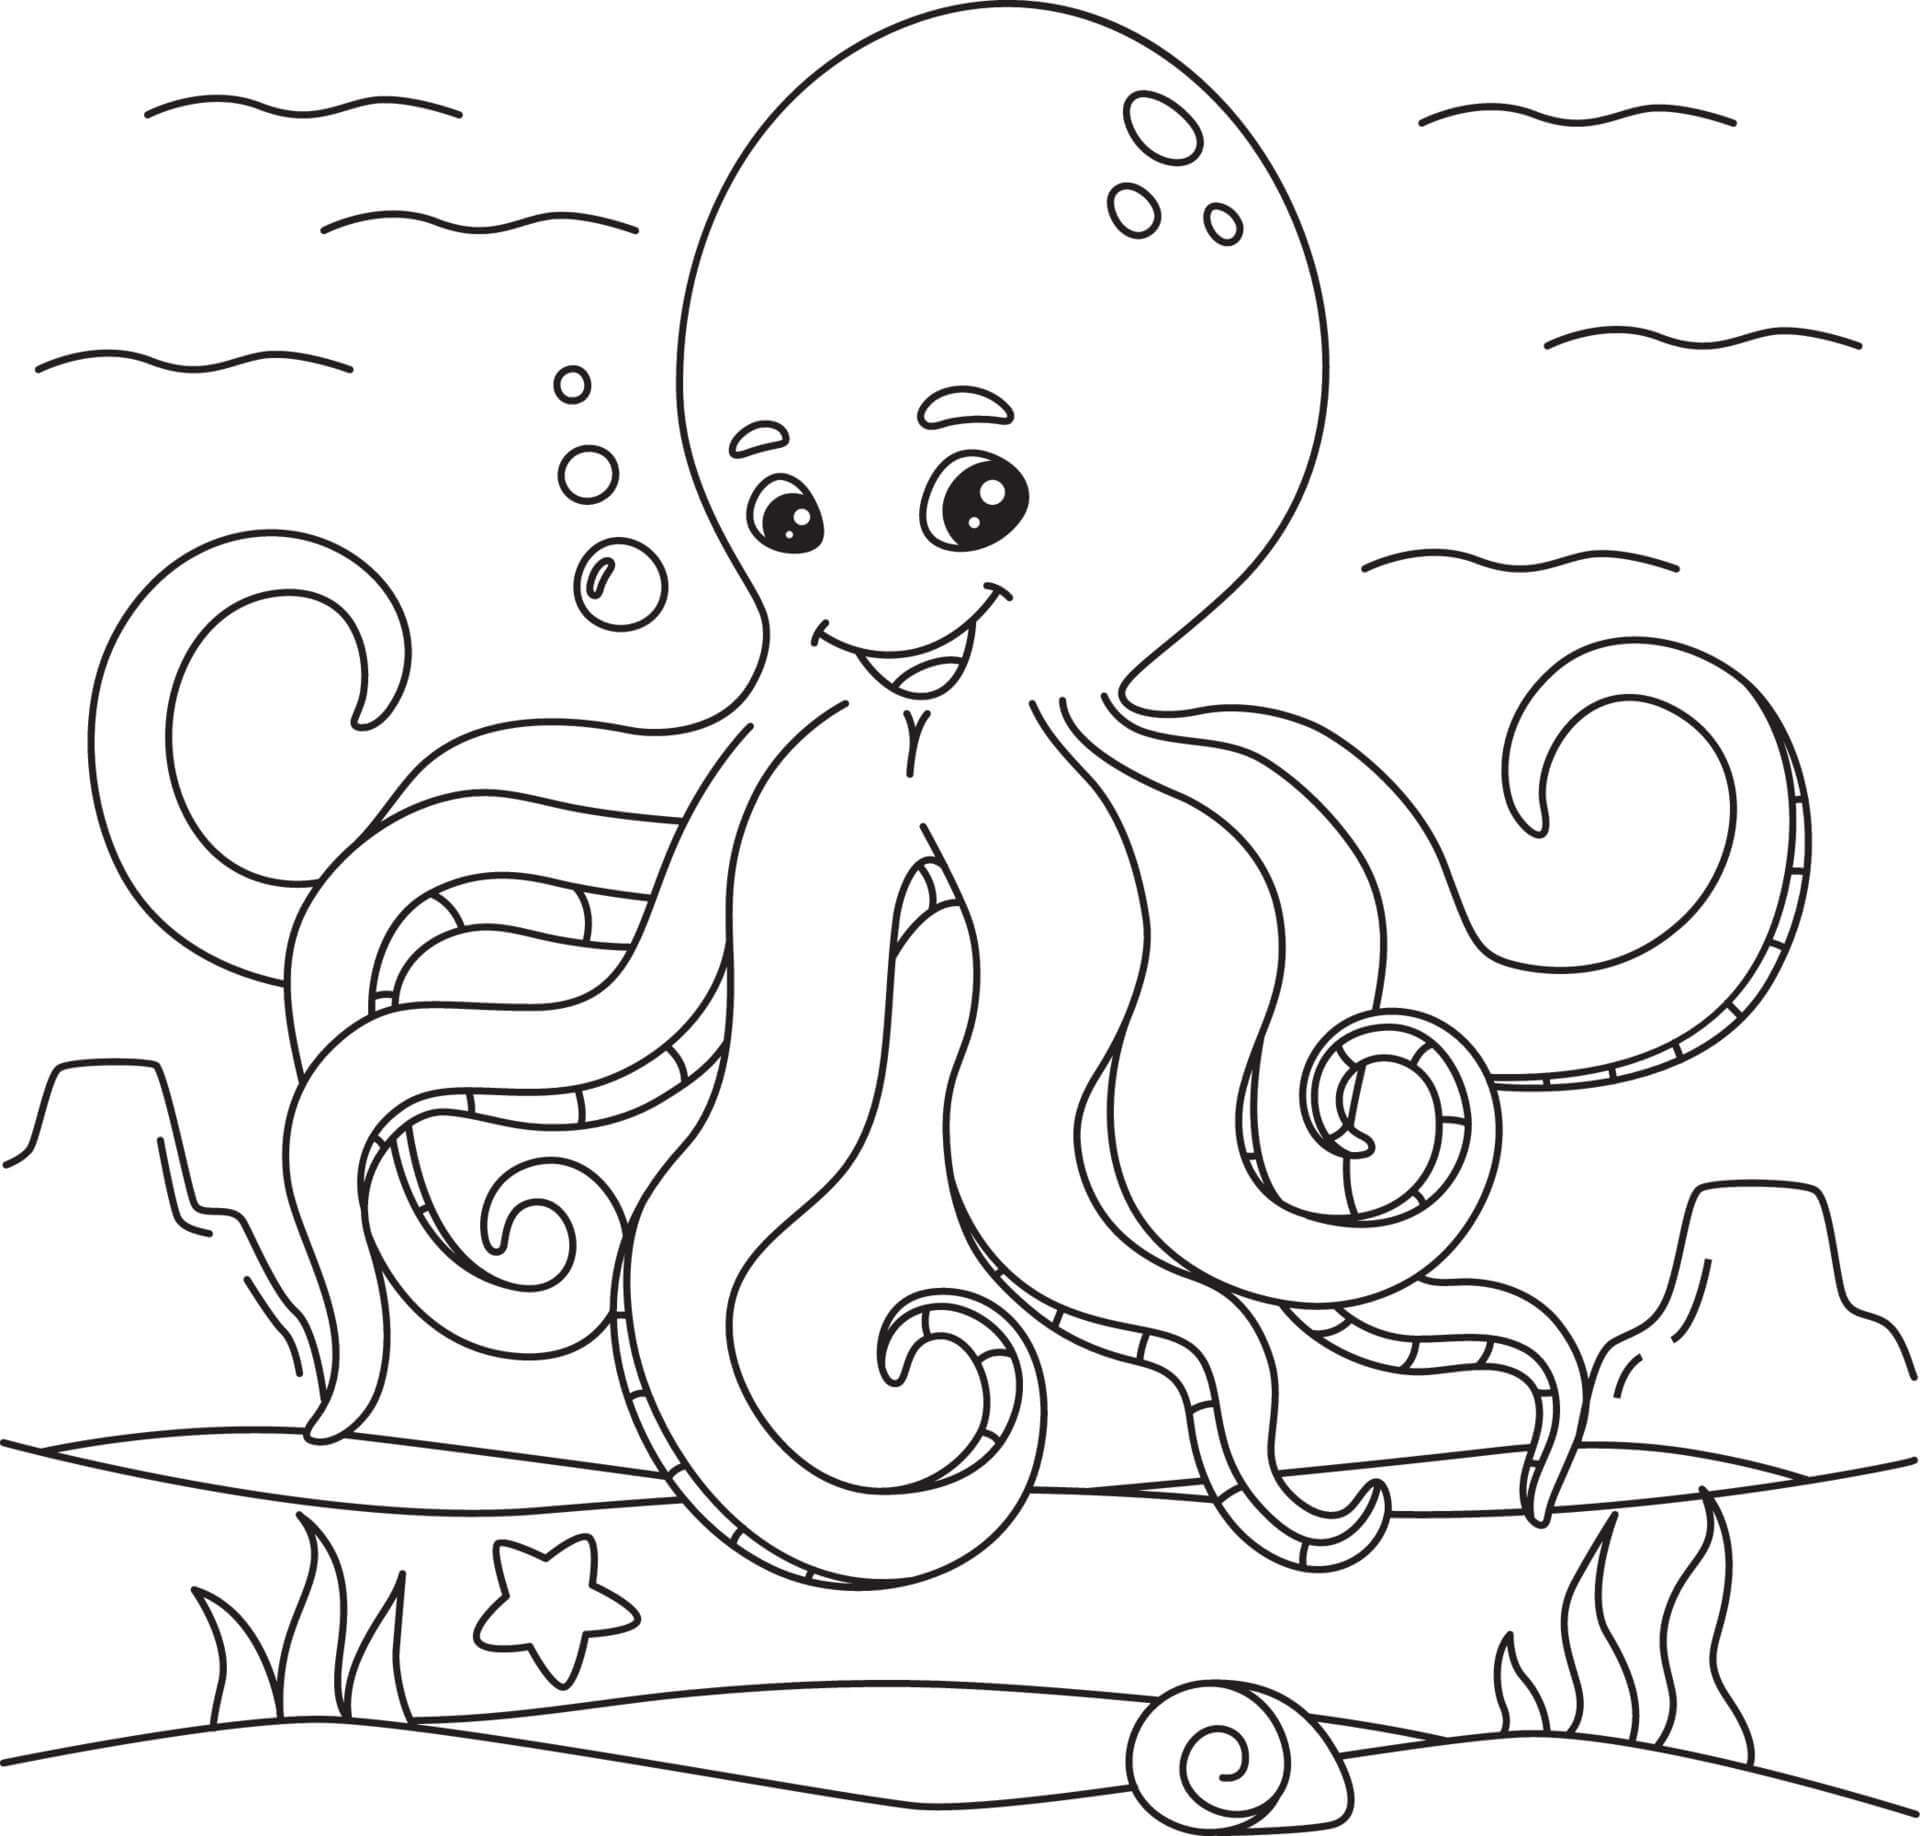 Happy Octopus coloring page - Download, Print or Color Online for Free